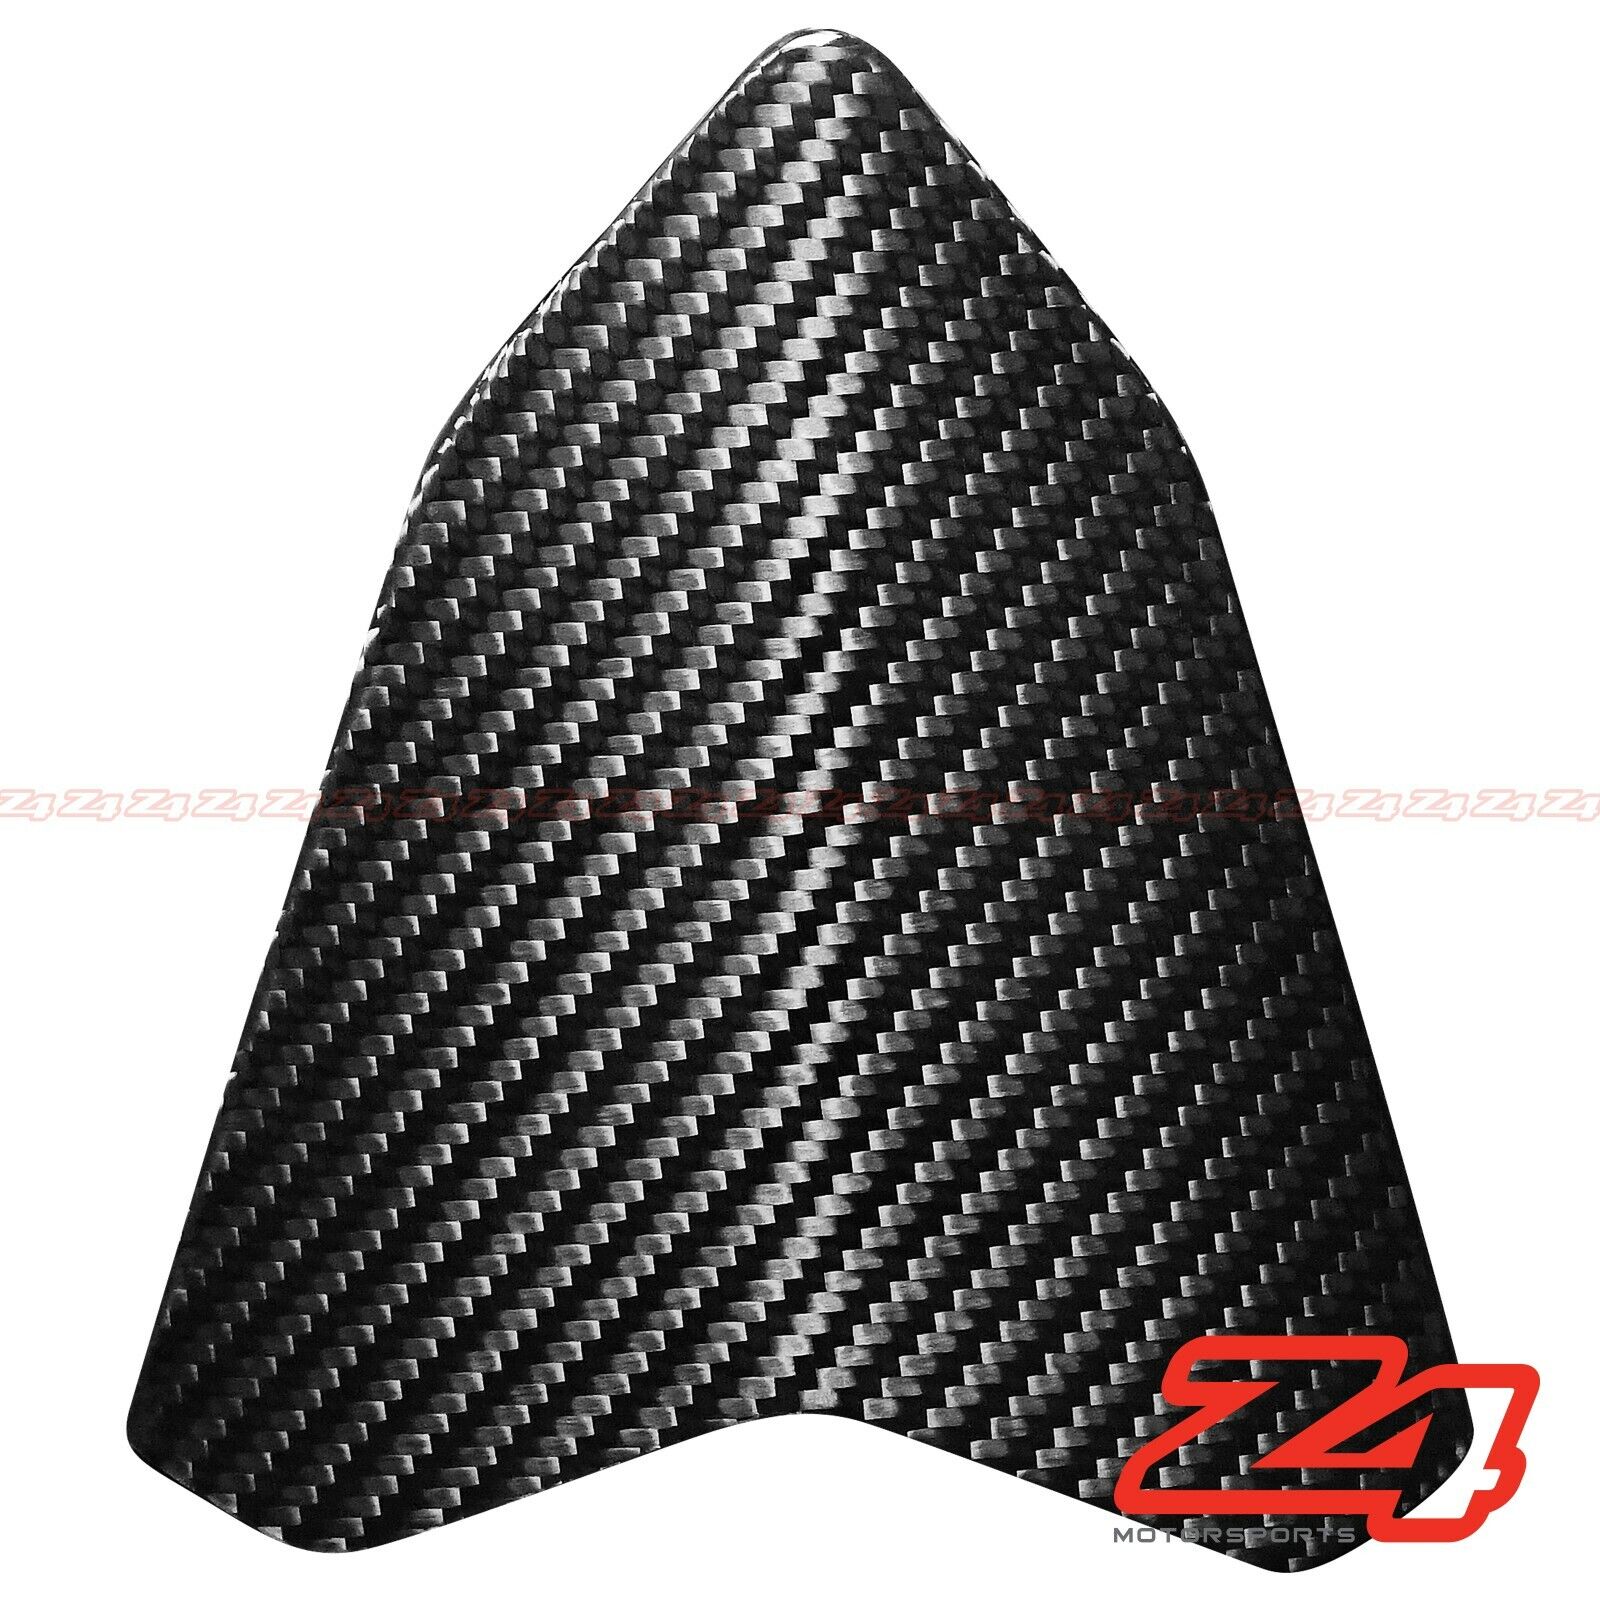 2015 2016 Stradale 800 Rear Upper Tail Seat Cover Cowling Fairing Carbon Fiber